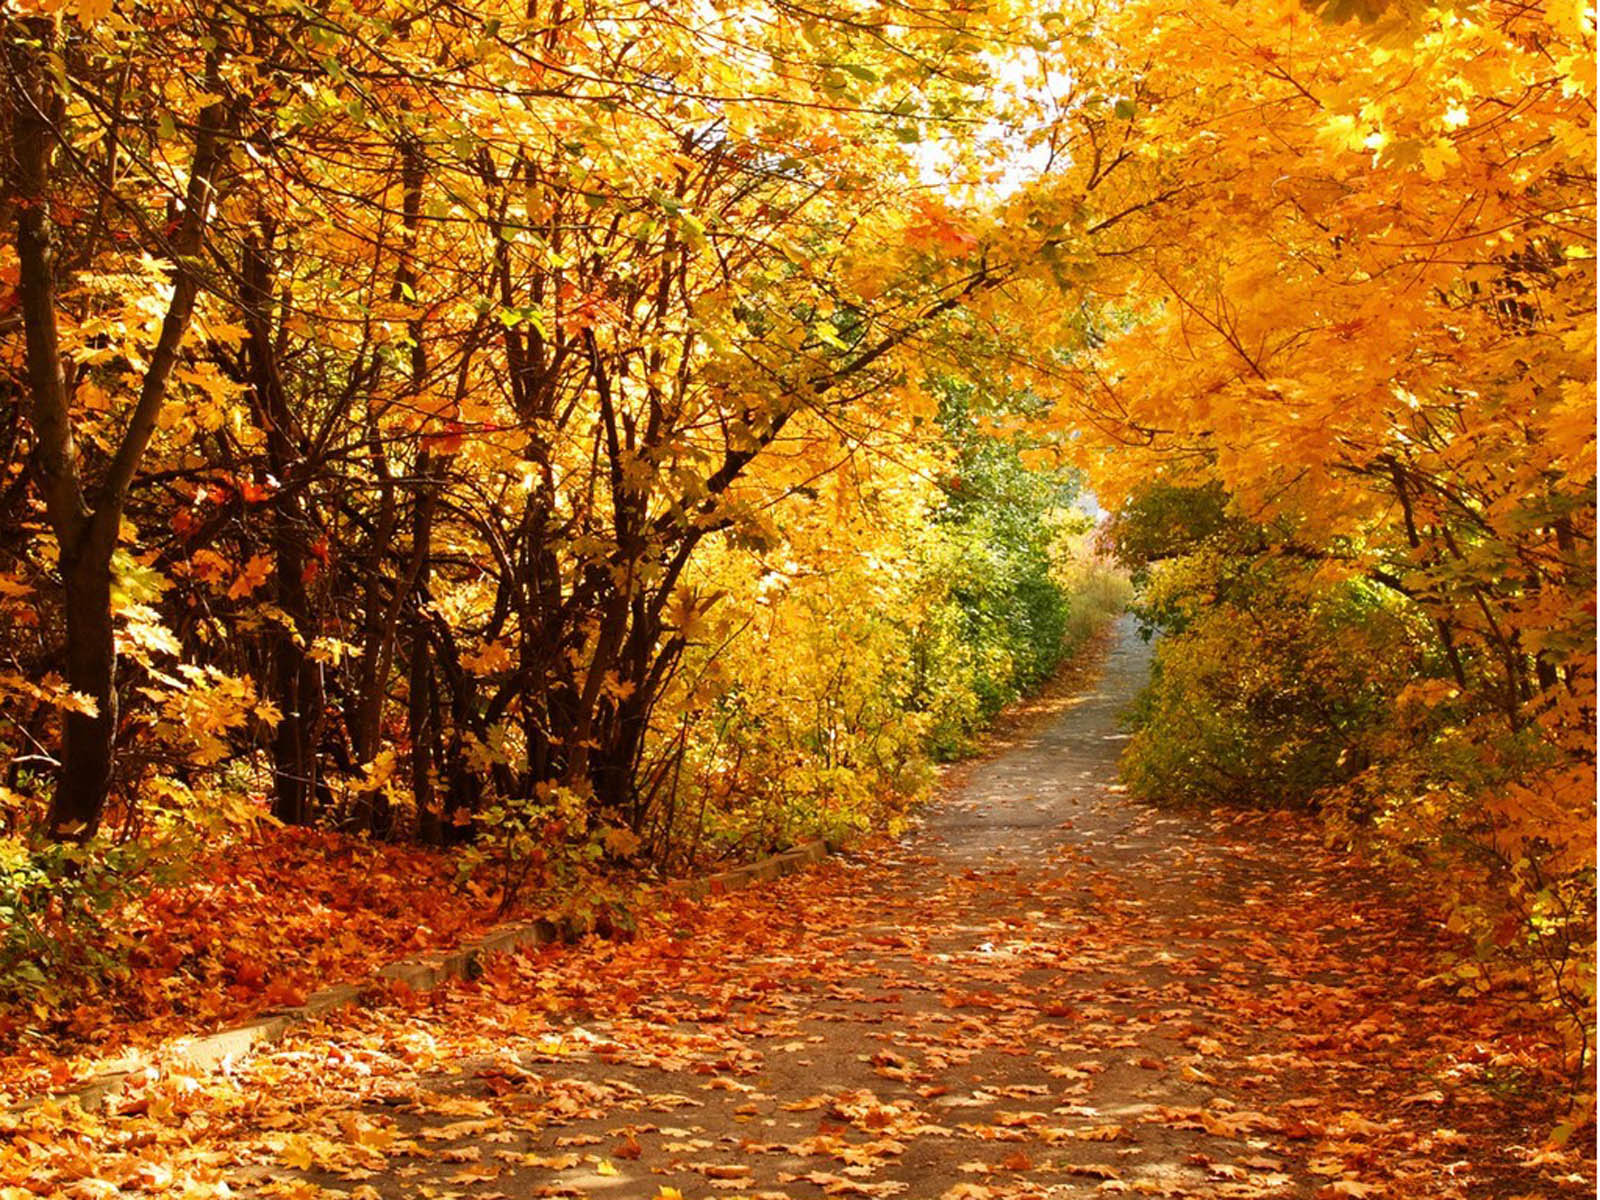 ... Autumn Scenery Photos, Beautiful Autumn Scenery Images and Pictures